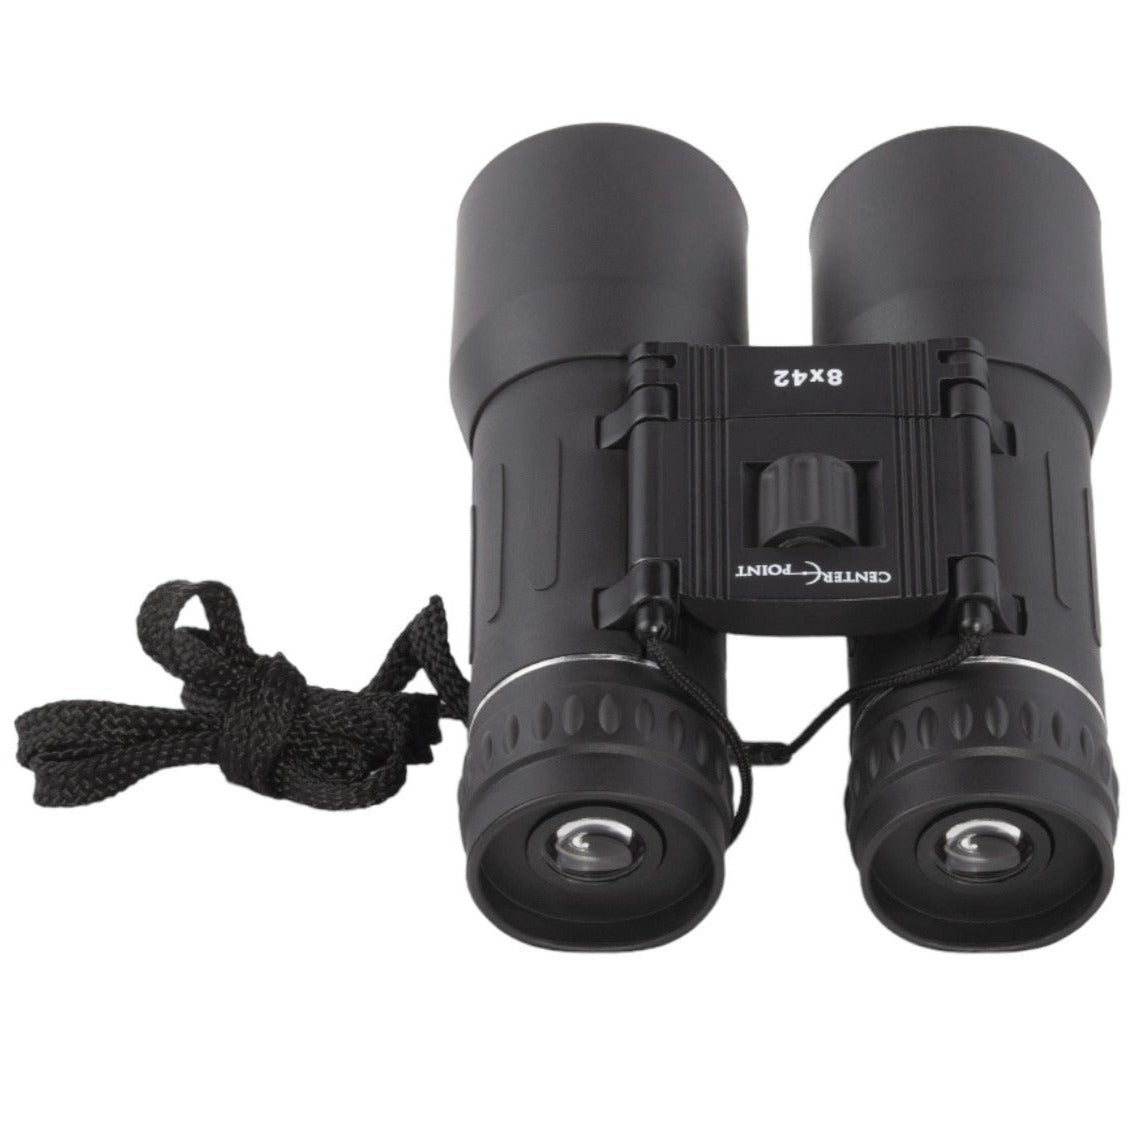 CenterPoint P1 Series 8x42mm Compact Binoculars, Wide Field View, 8X Magnification, Model 73054, Black